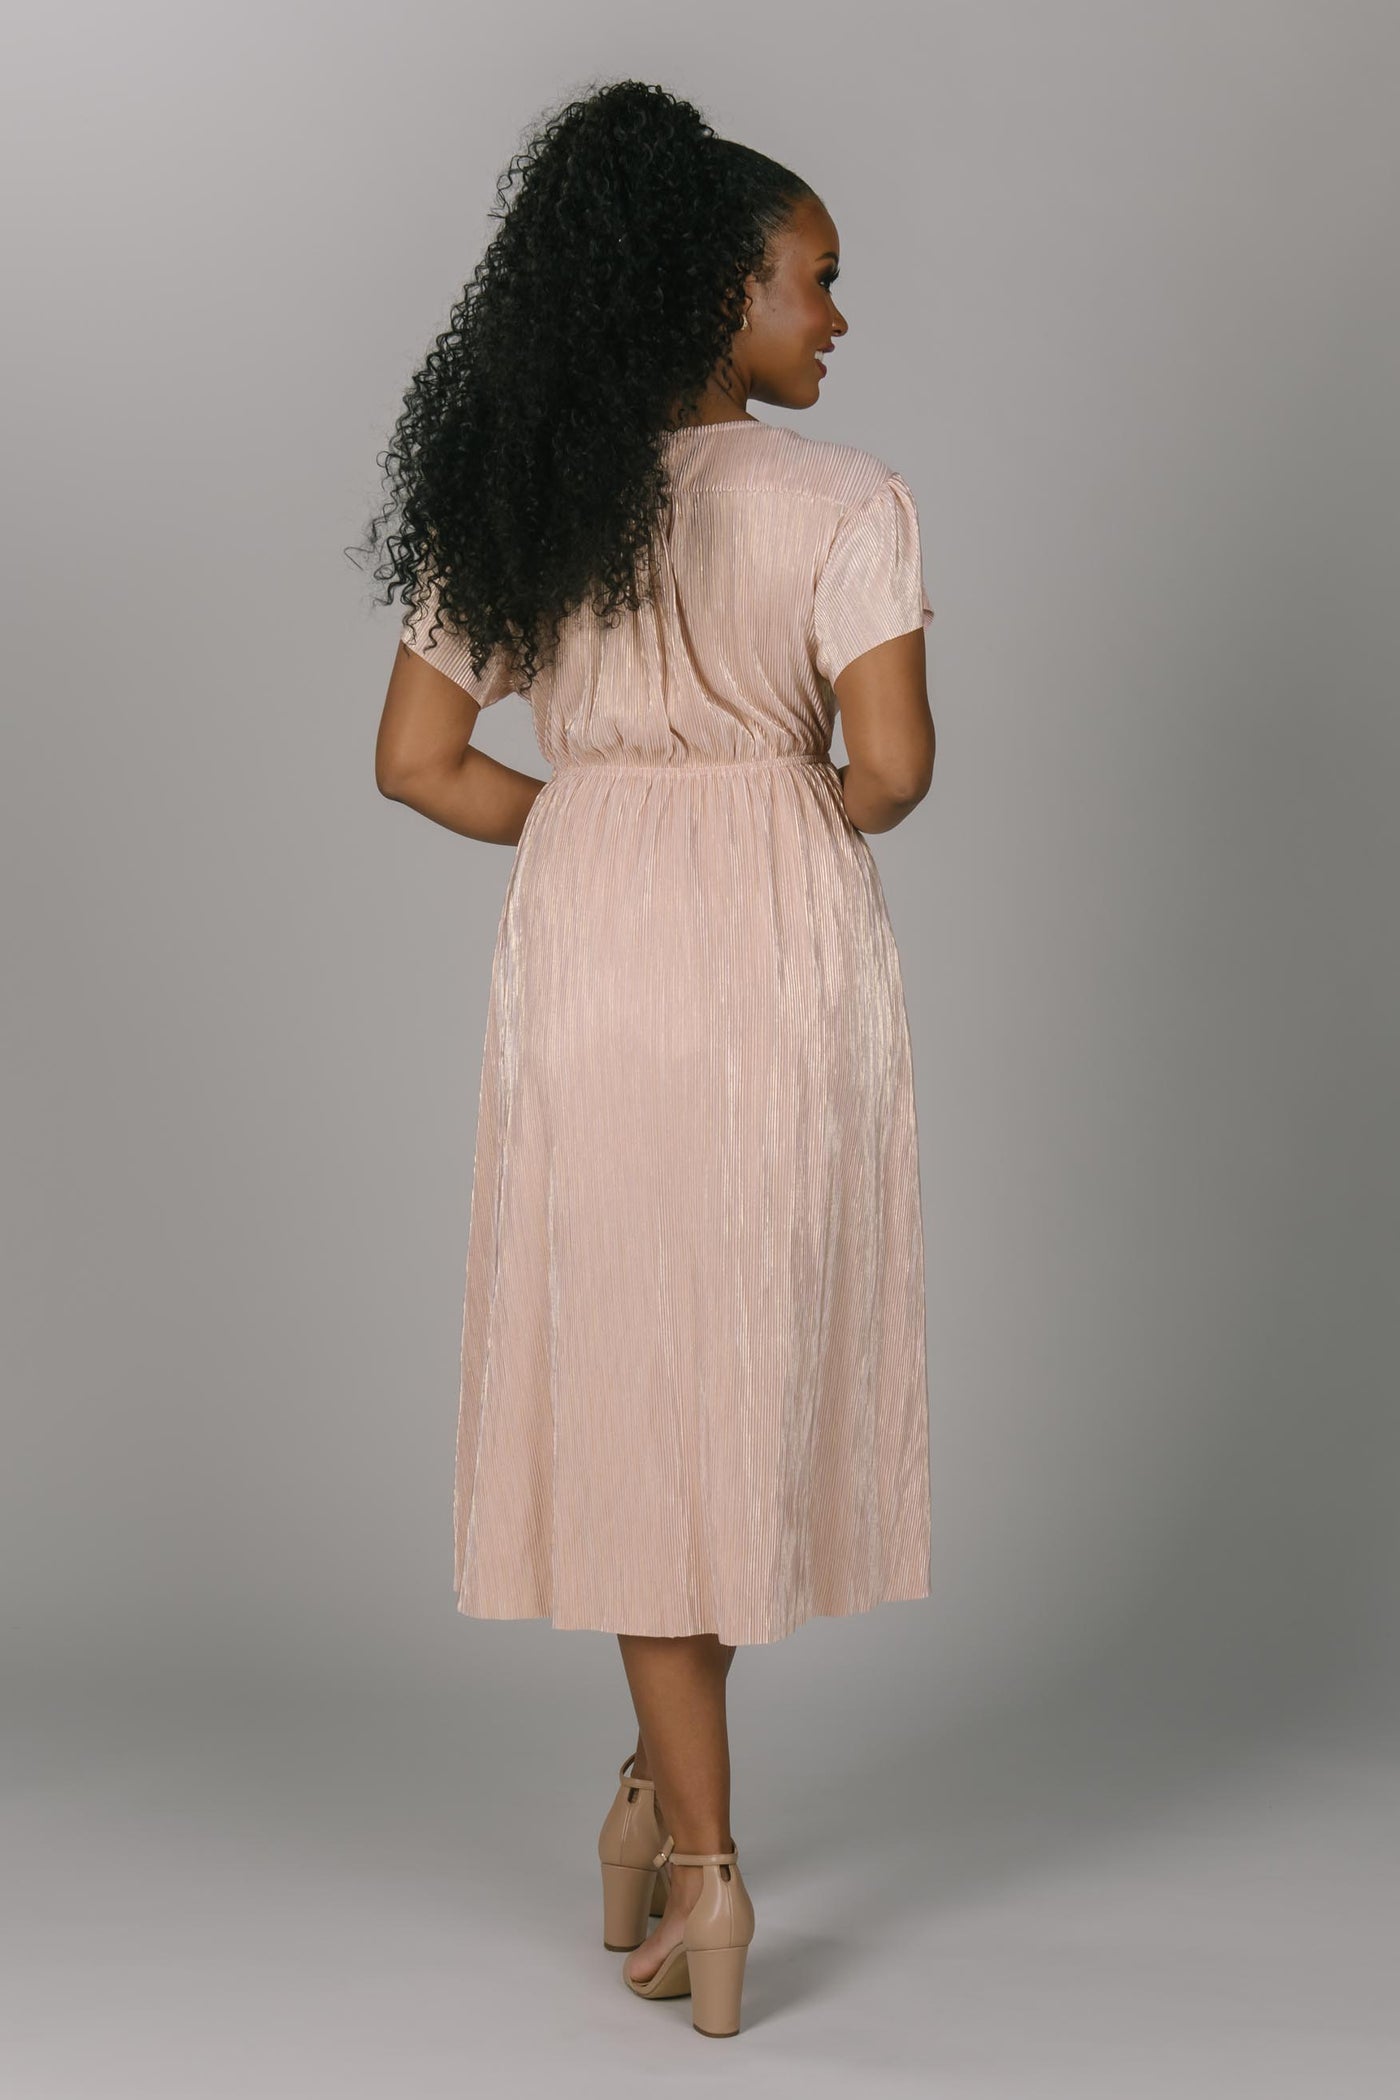 Back view of metallic modest bridesmaid dress. This dress hits mid-calf and is a v-neckline. The sleeves are flutter sleeve style. This pink/gold color makes the perfect bridesmaid dress.